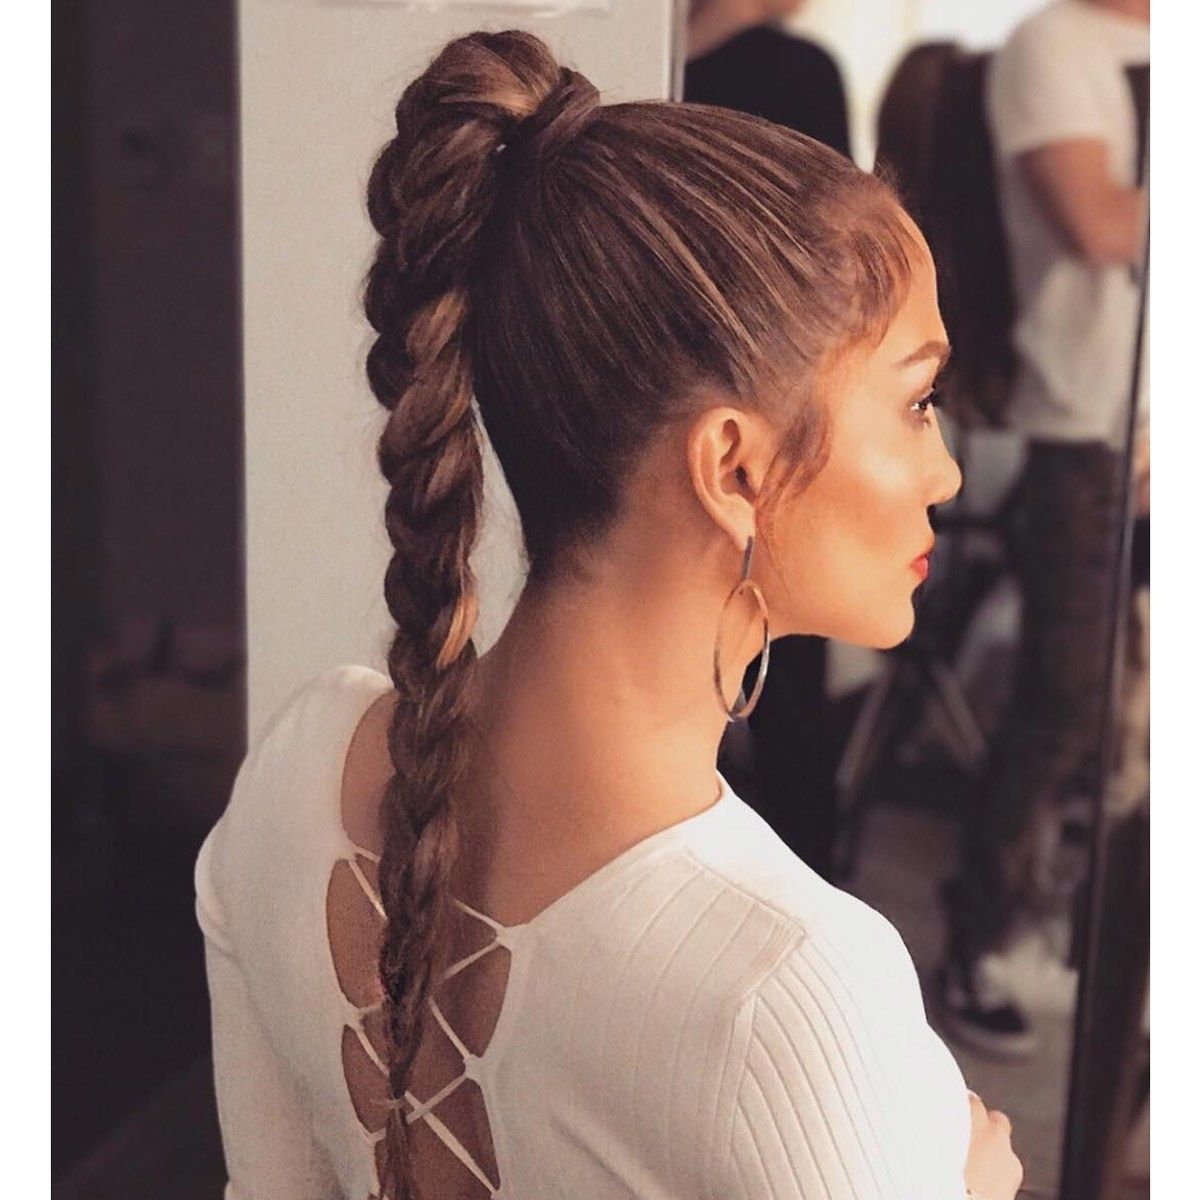 27 Ponytail Hairstyles For 2018: Best Ponytail Styles (View 12 of 20)